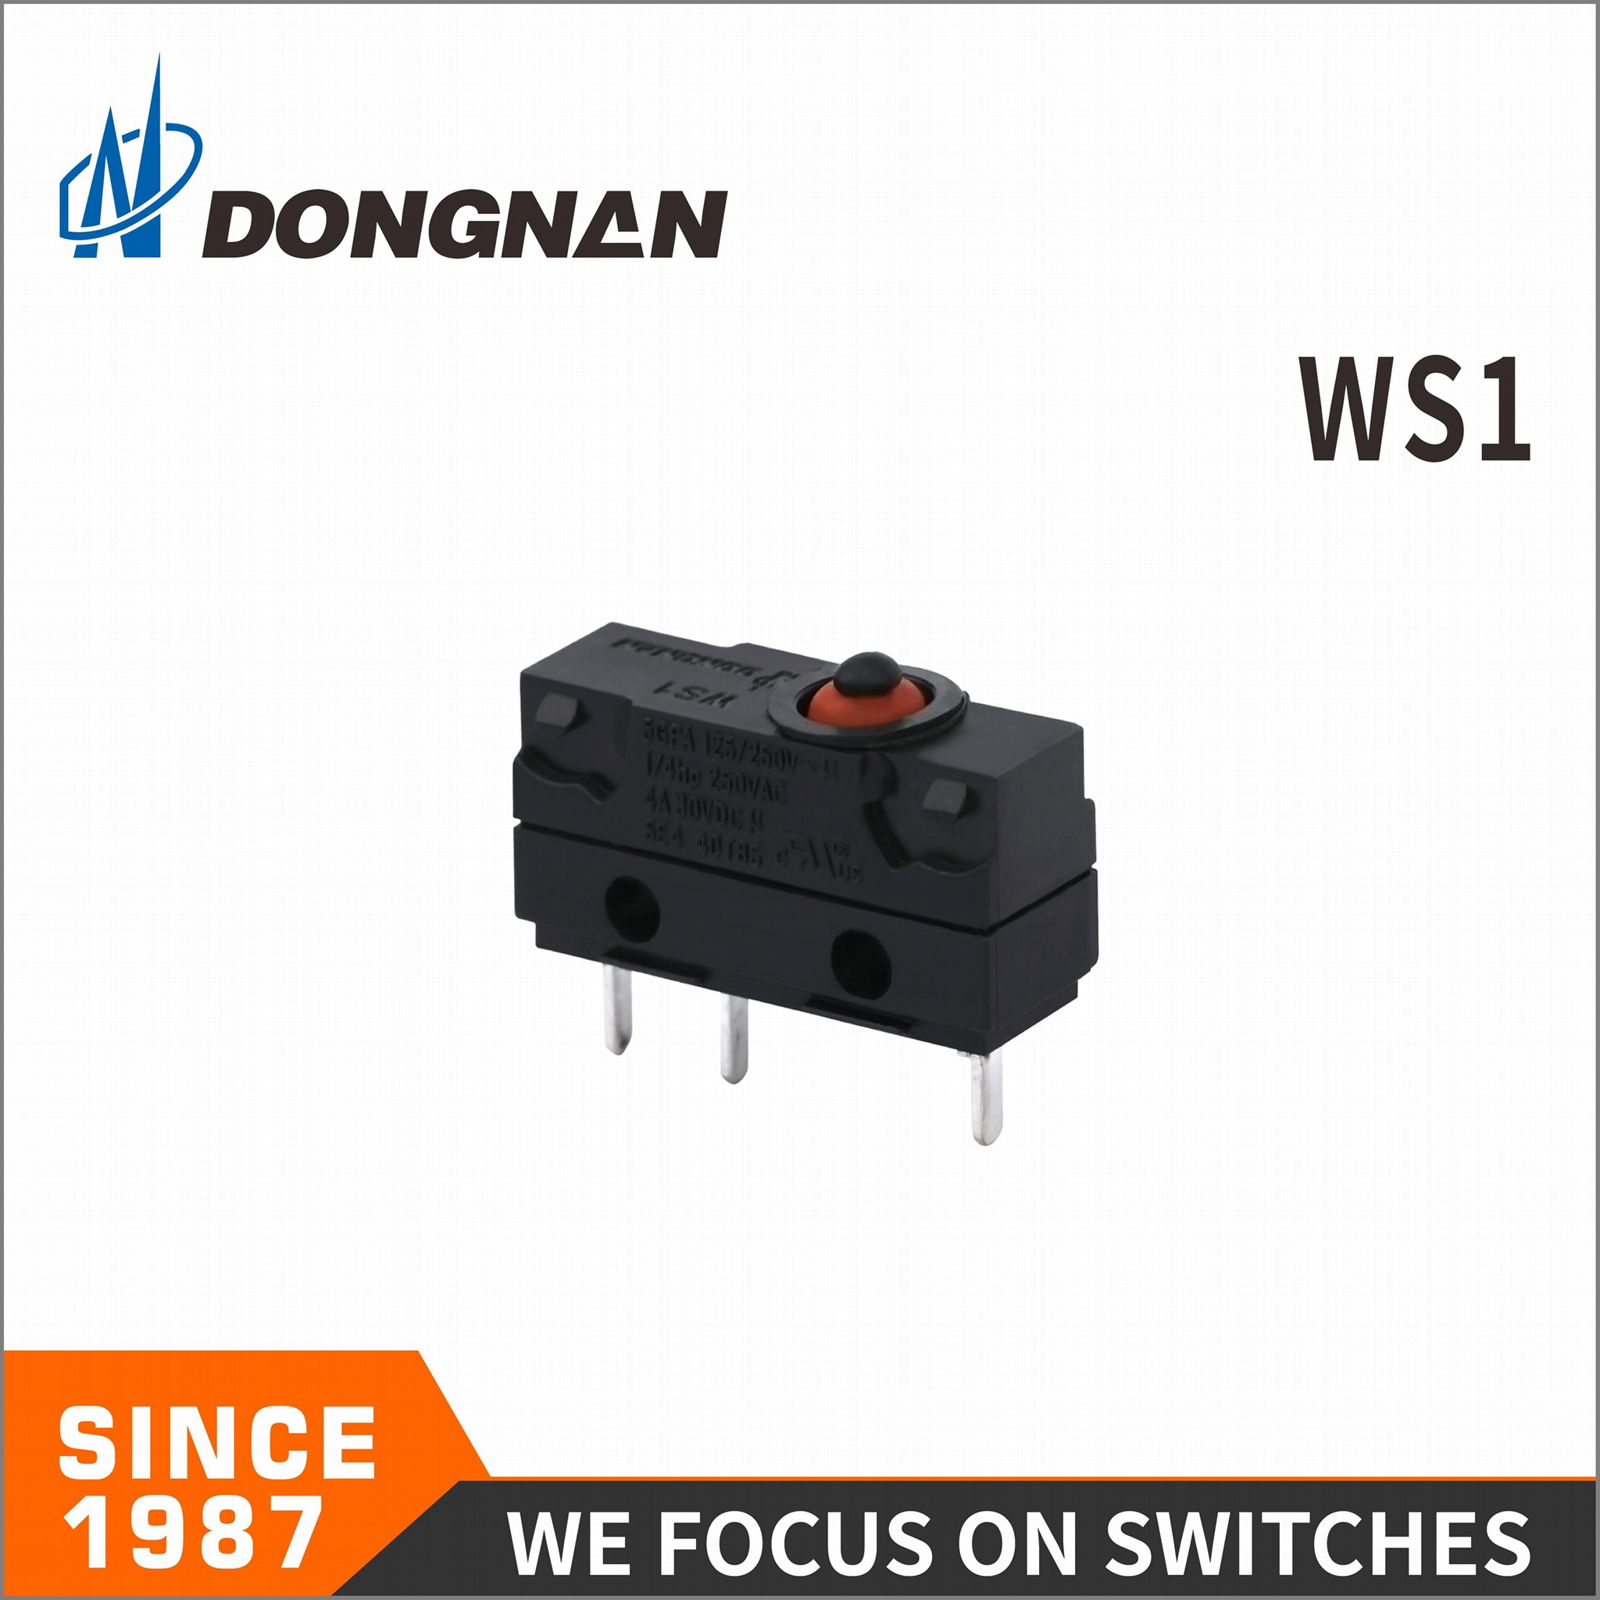 Dongnan IP67 Type Sealed Waterproof Switch Ws1 for Refrigerator 5